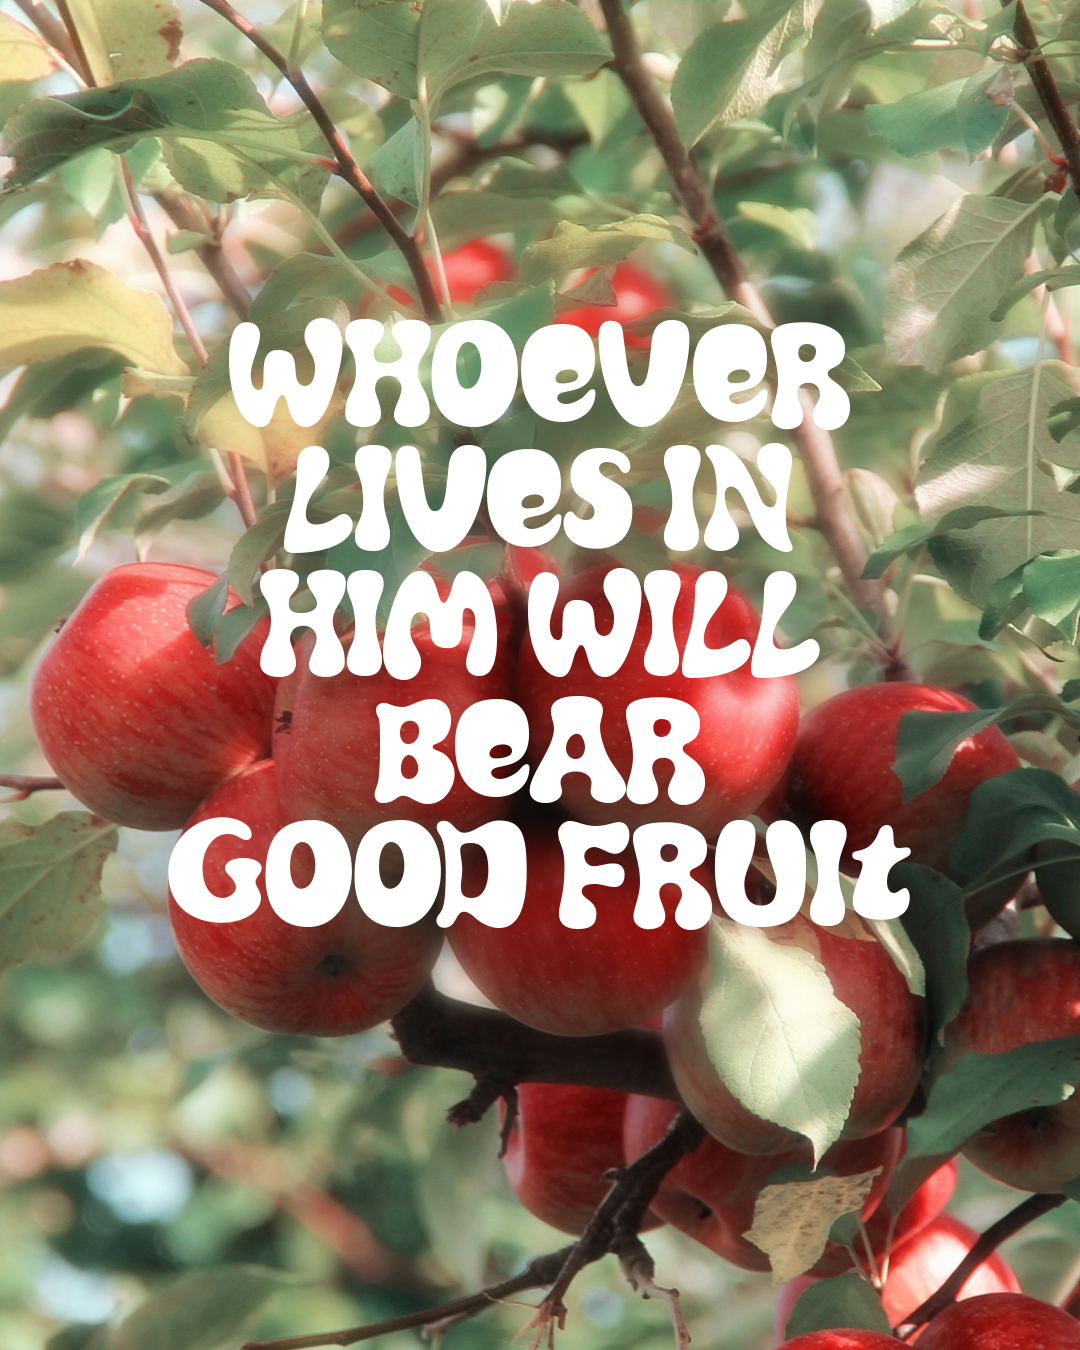 Whoever lives in Him will bear good fruit